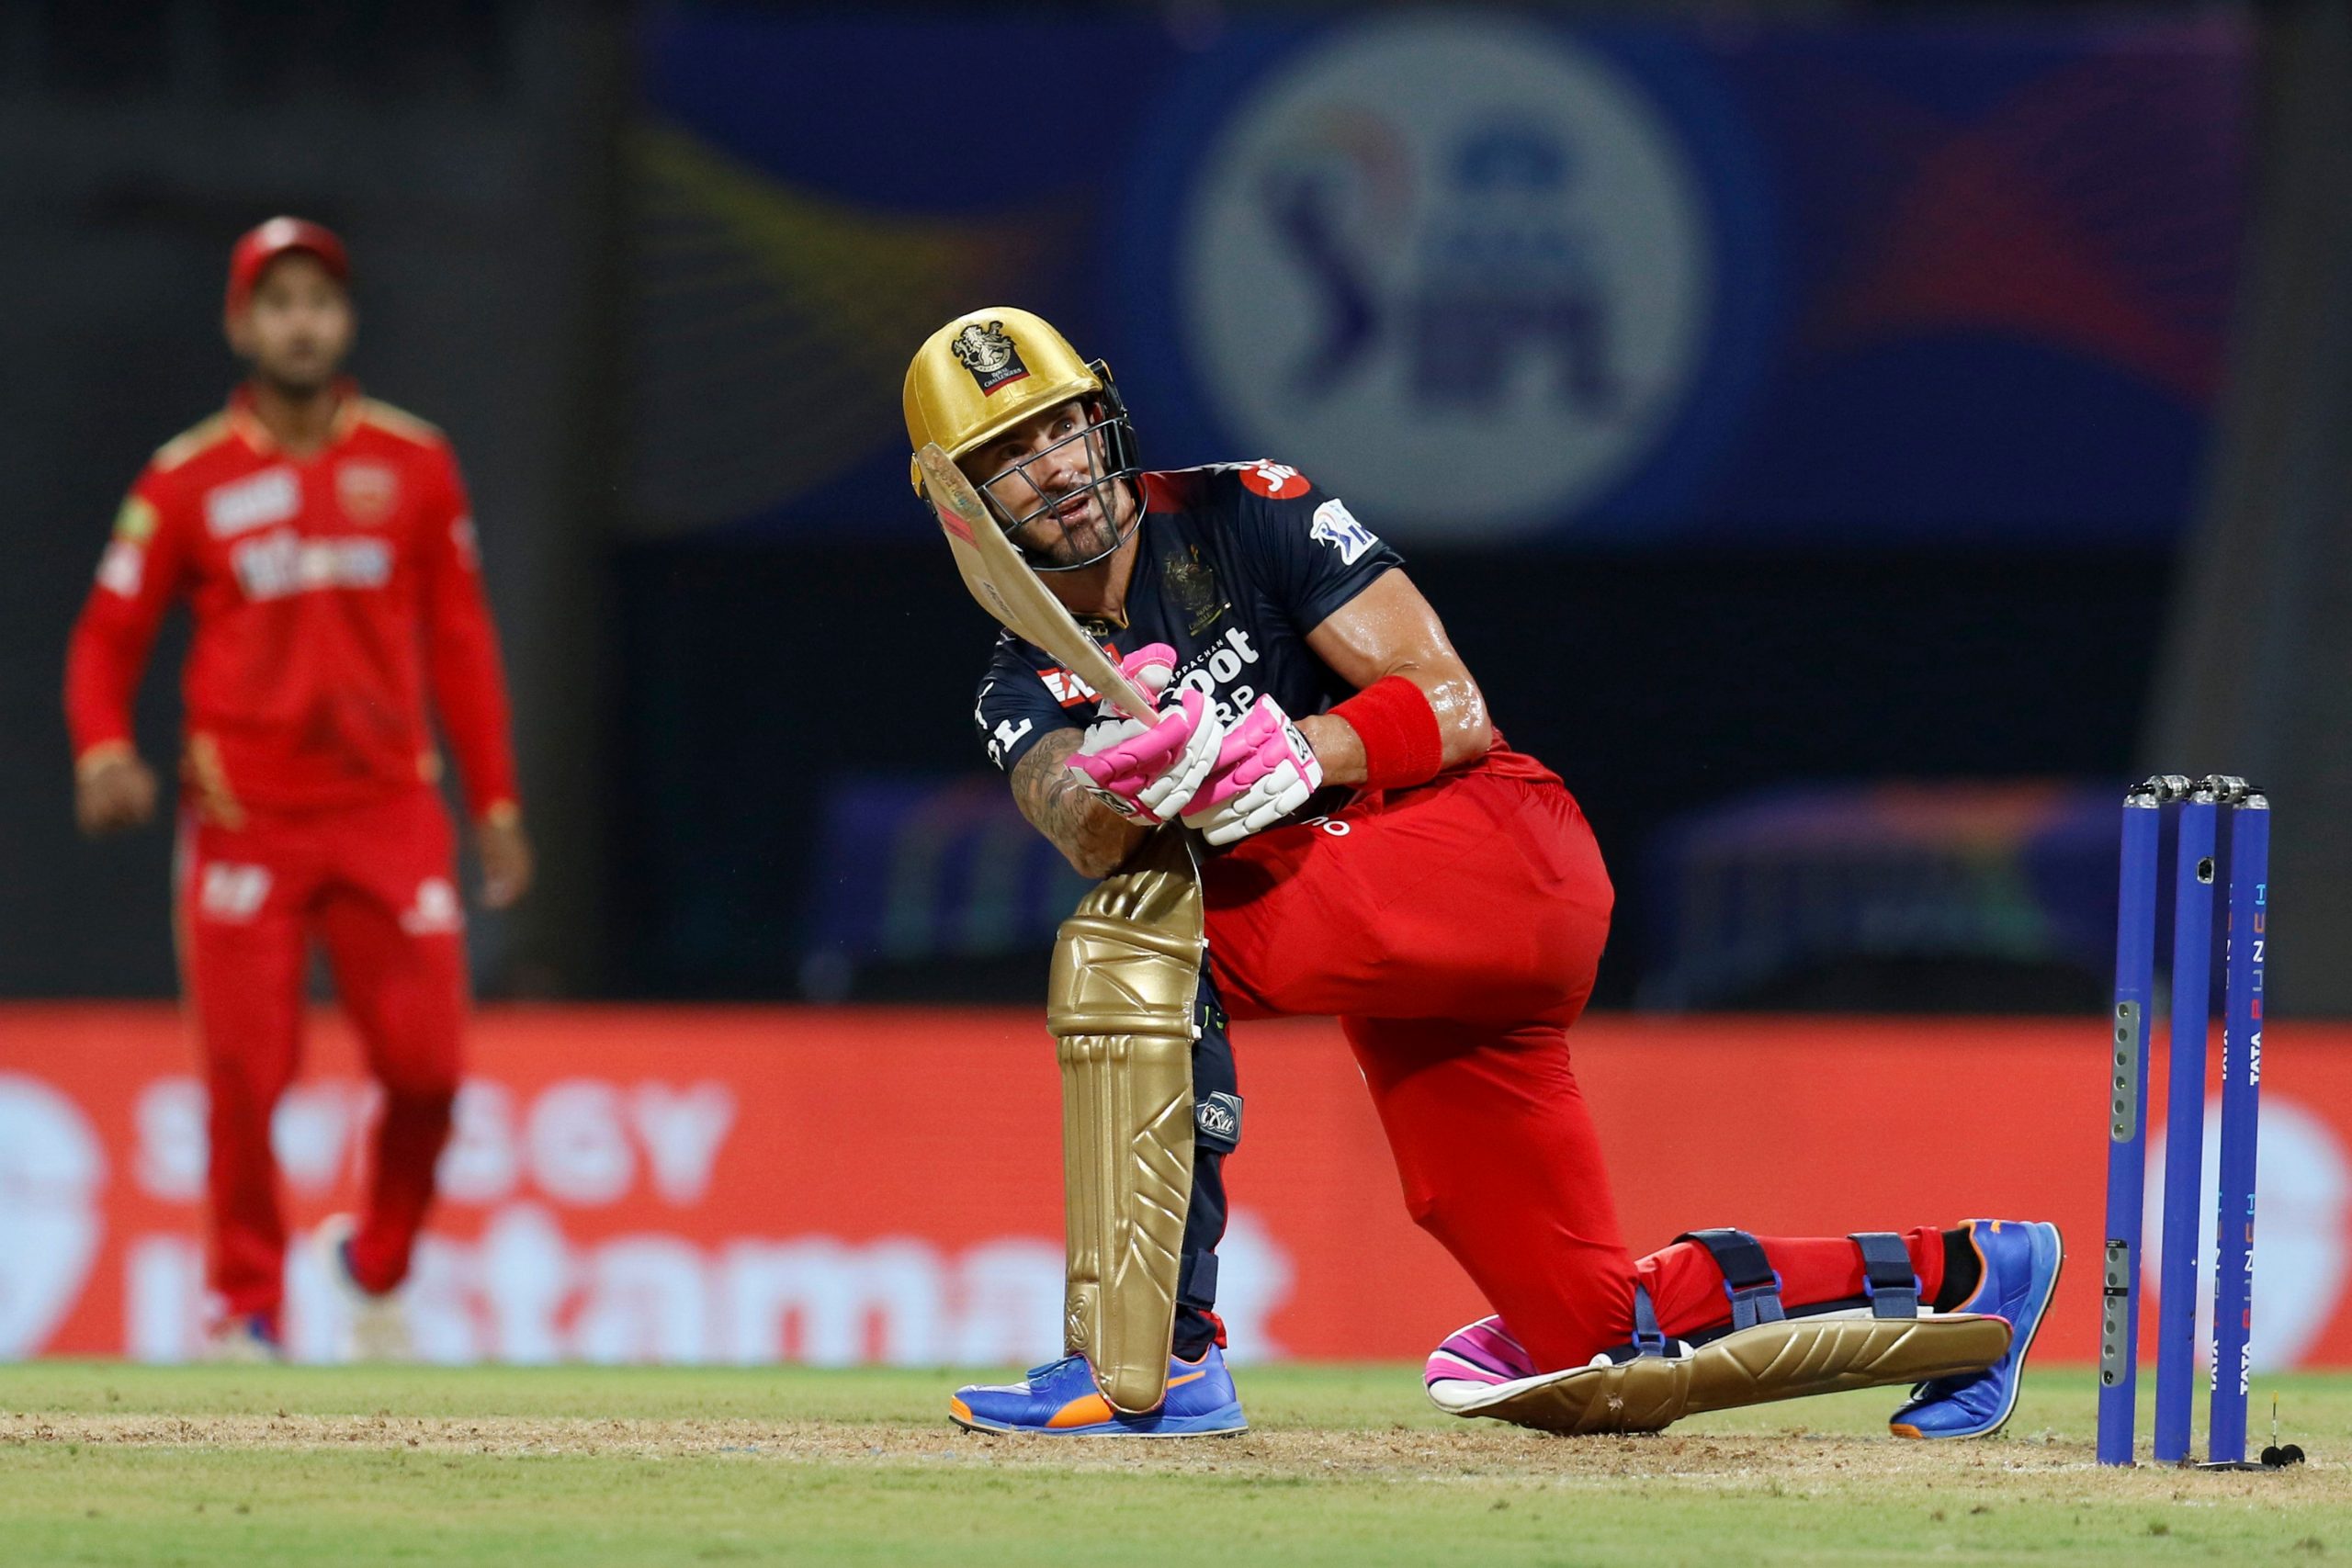 IPL 2022: Royal Challengers Bangalore, Lucknow Super Giants lock horns in battle for top-spot